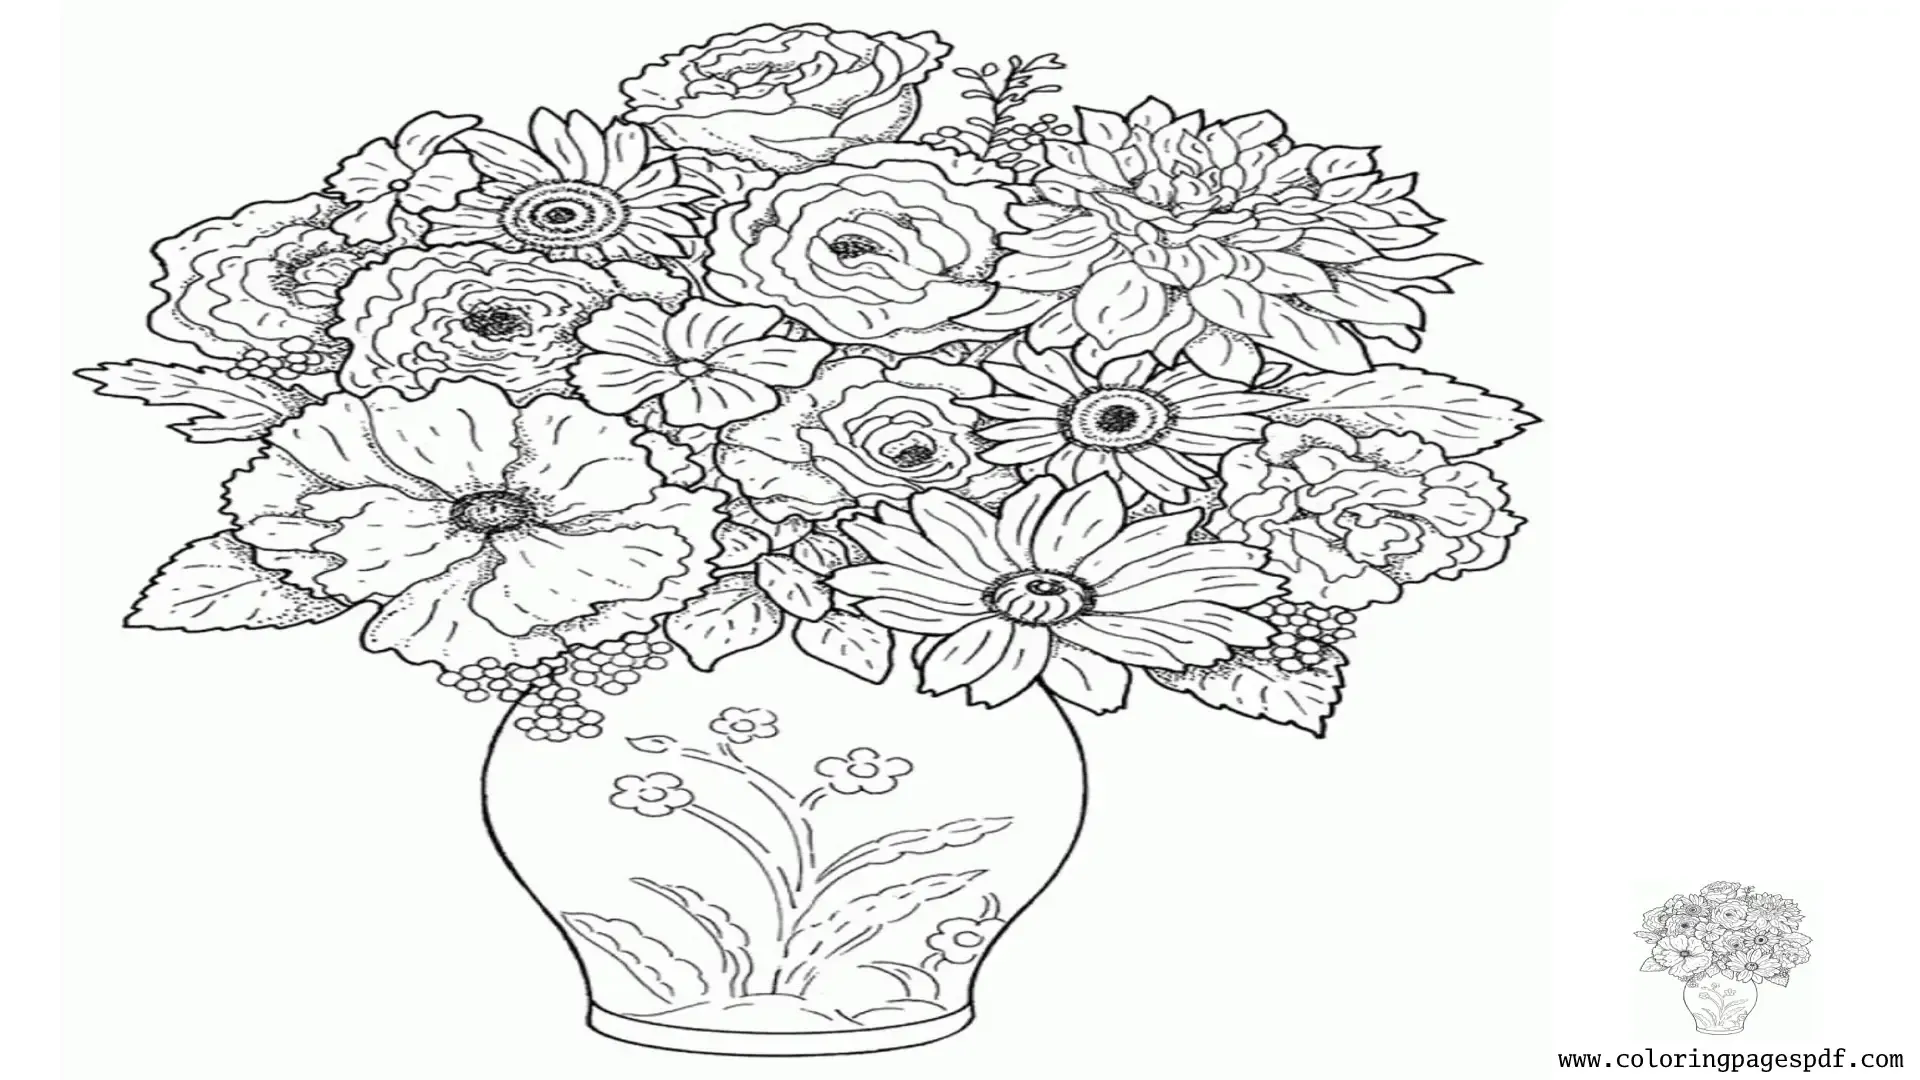 Coloring Page Of Different Flowers In A Vase